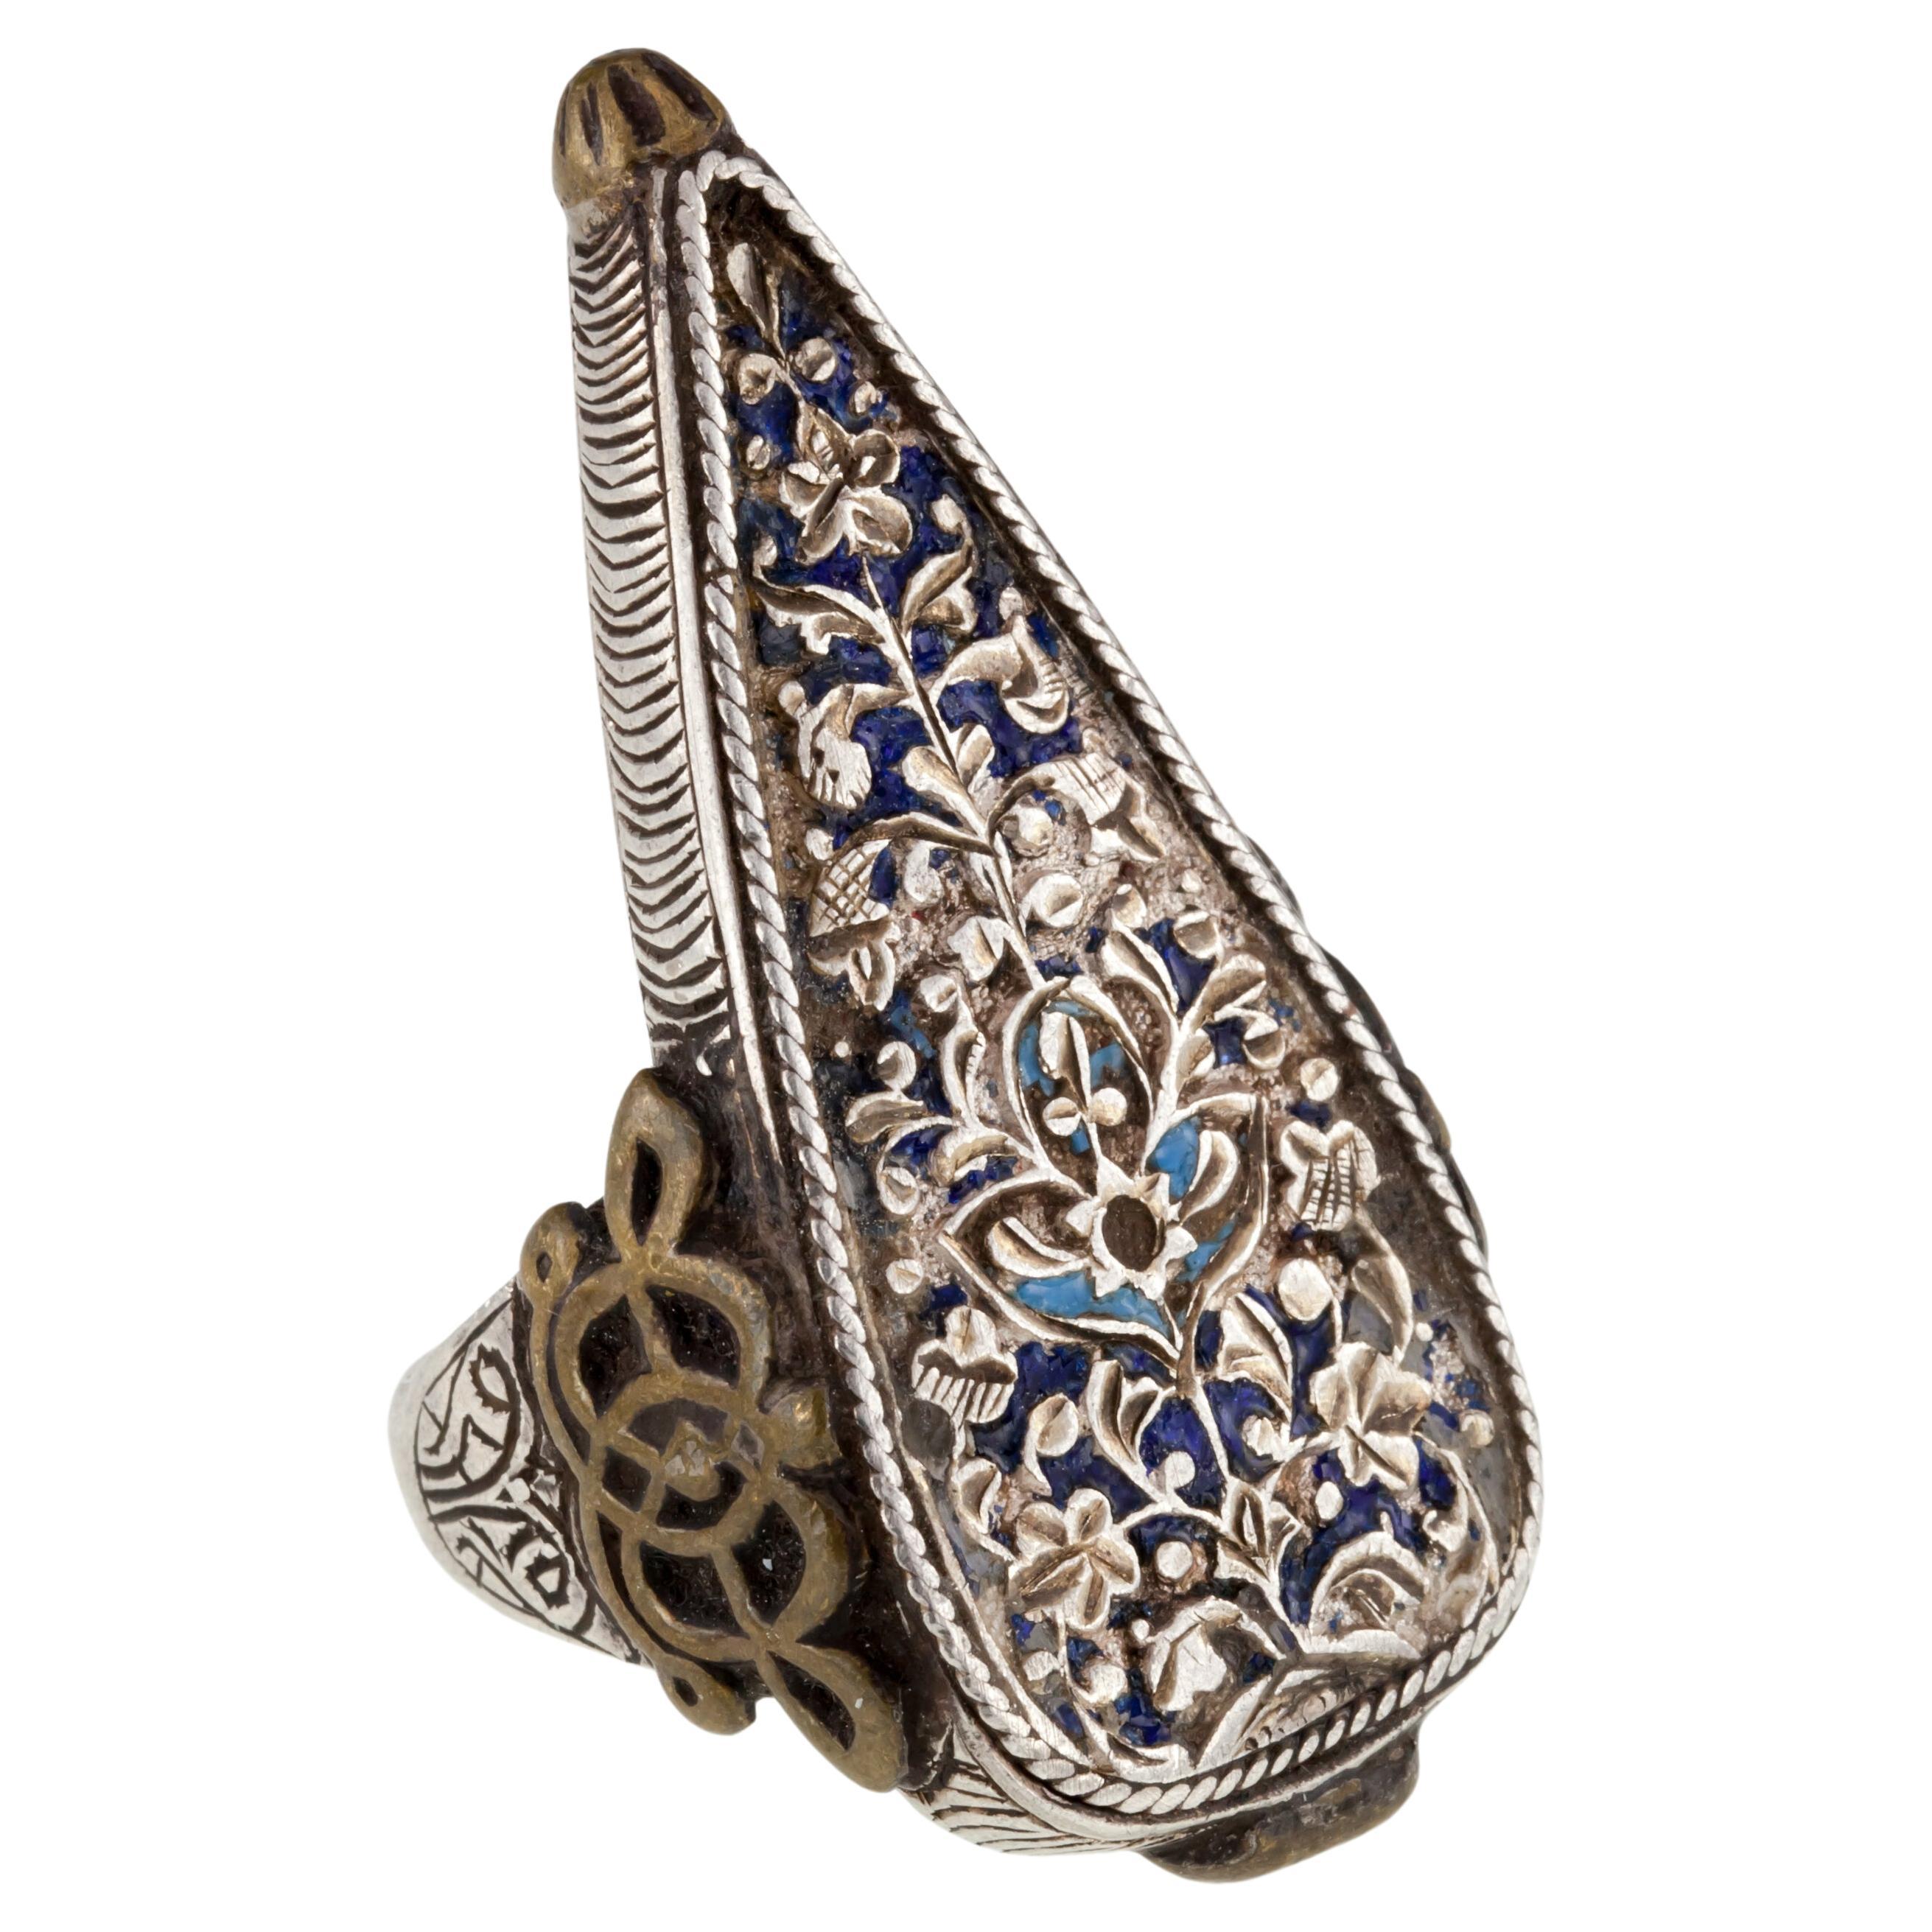 Gorgeous Silver and Brass Afghan Ring
Features Teardrop-Shaped Plaque with Intricate Etched Design
Enamel Detailing (Some Worn off)
Size 6
Size of Plaque = 45 mm Long x 20 mm Wide
Total Mass = 21.7 grams
Gorgeous Gift!